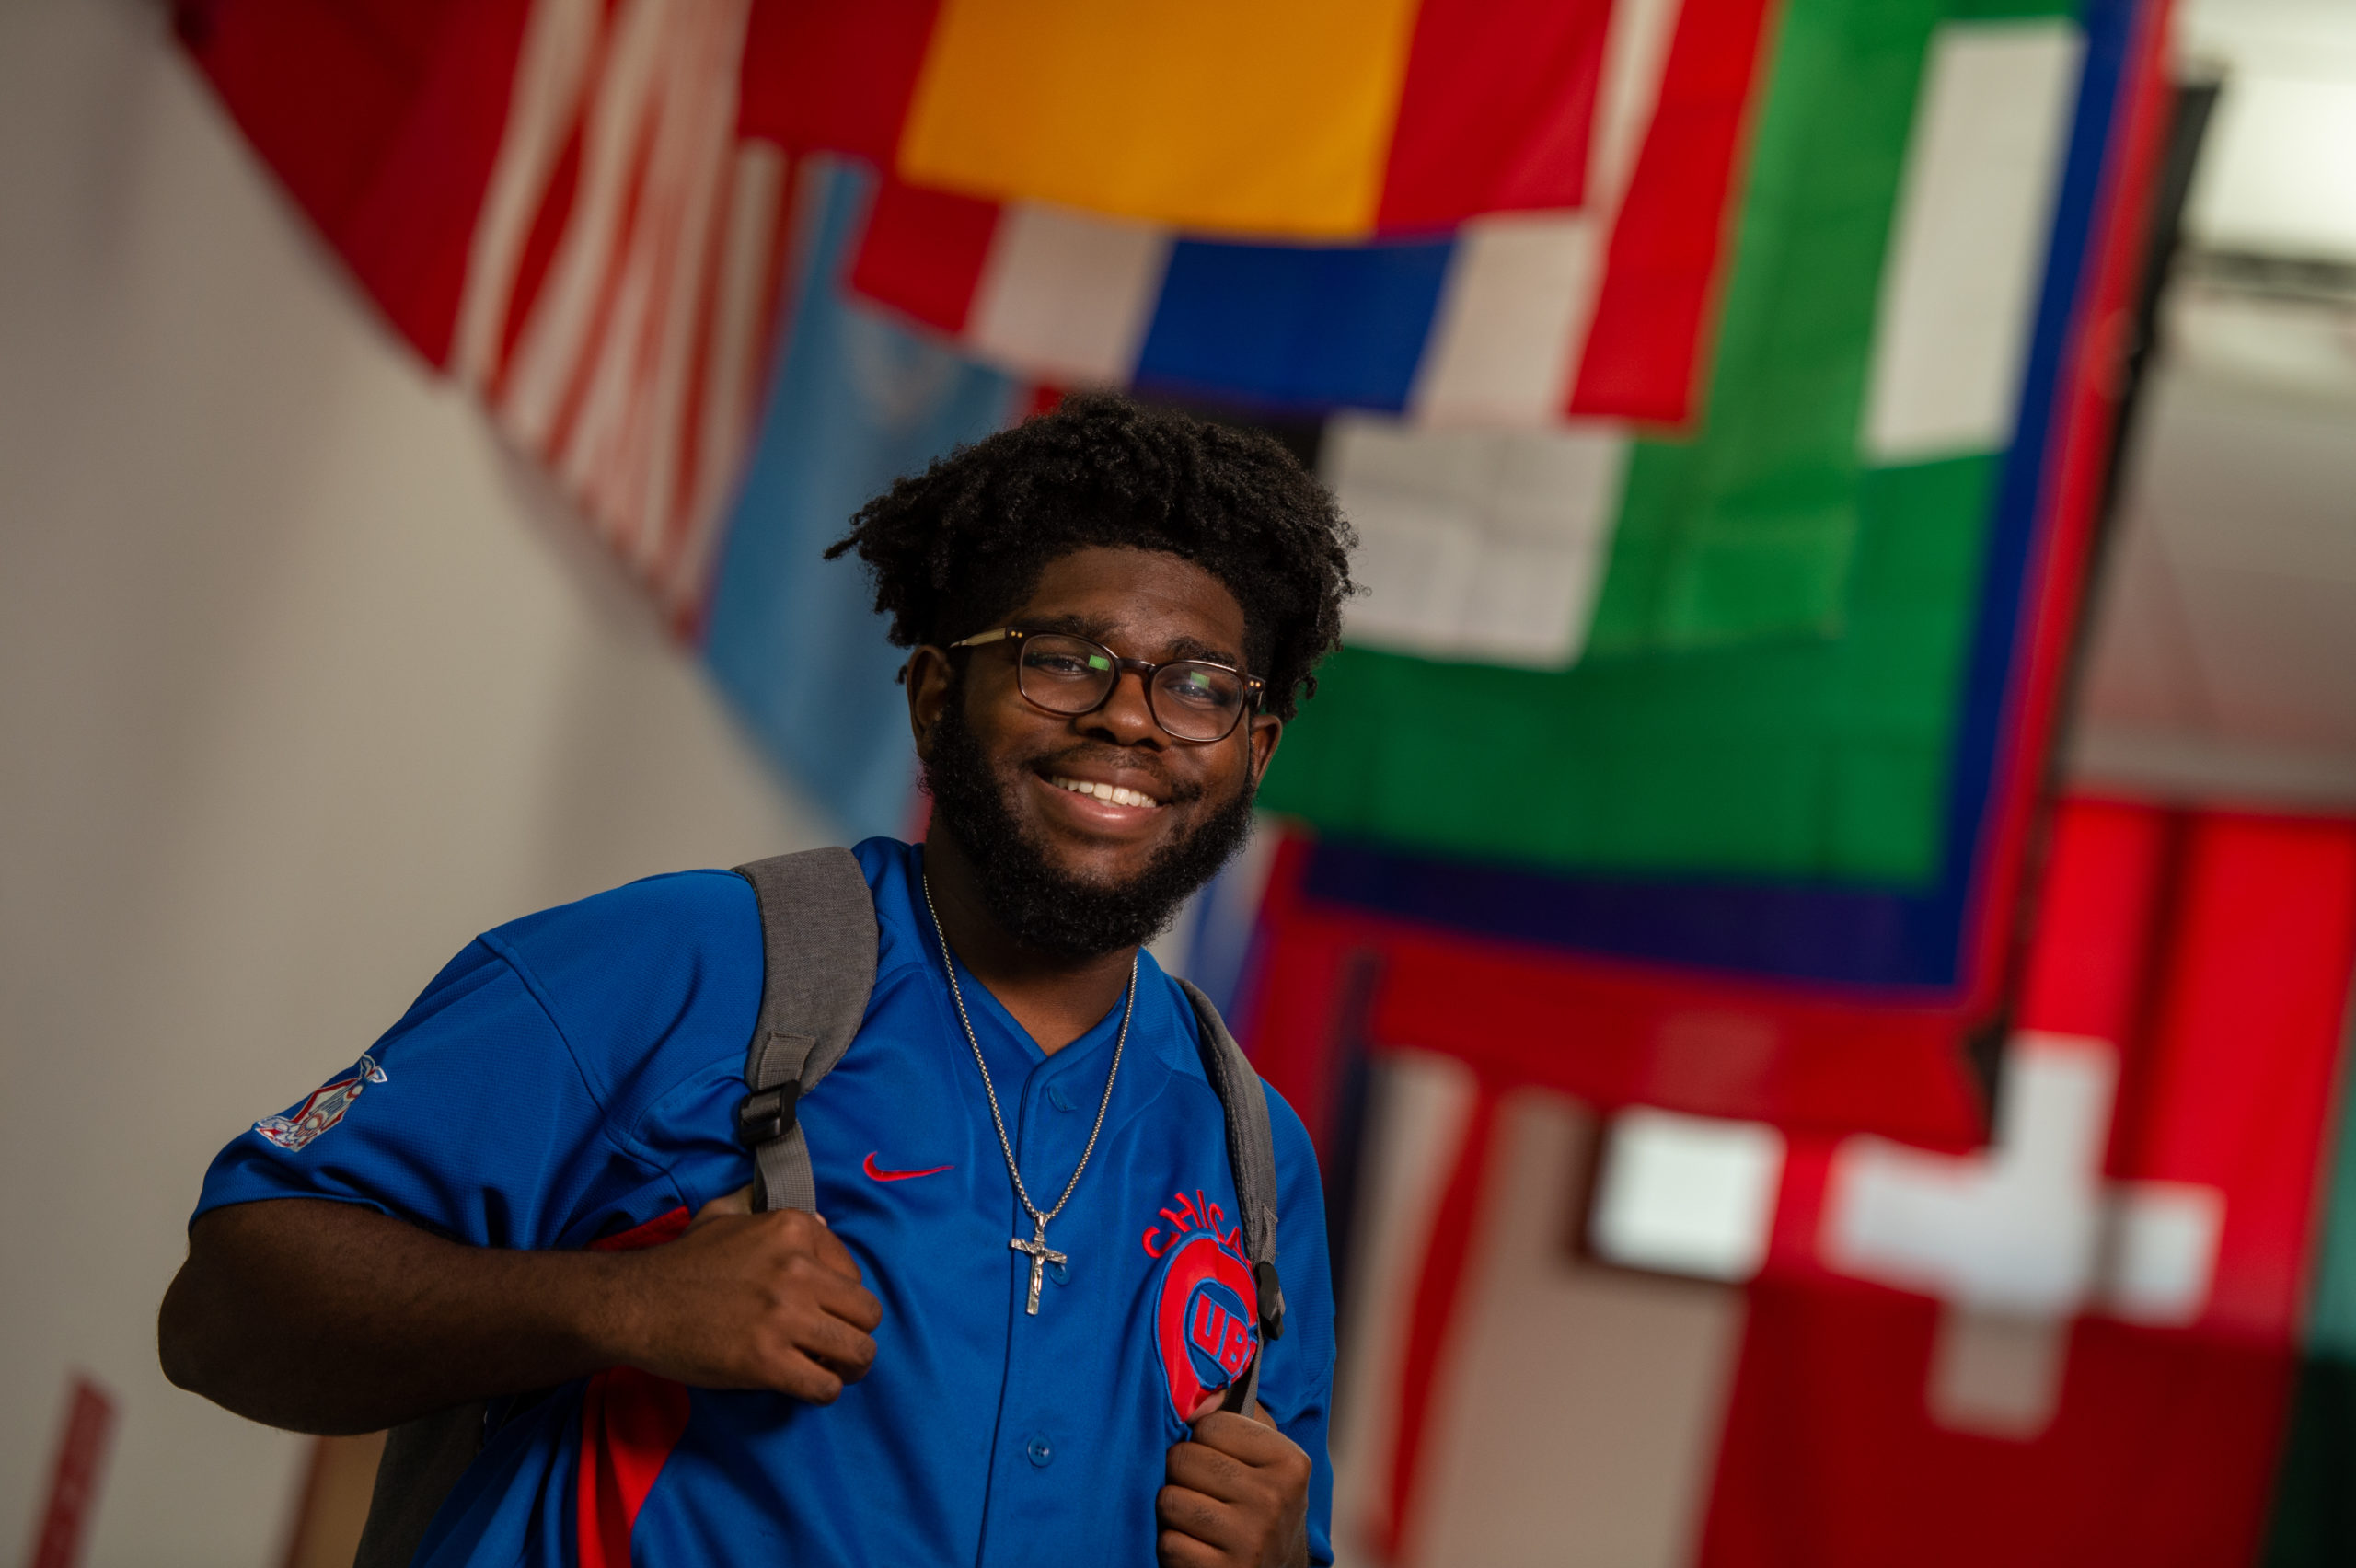 Blackburn student, Kionte Baker, posing for a picture near the flags at the Demuzio Campus Center.